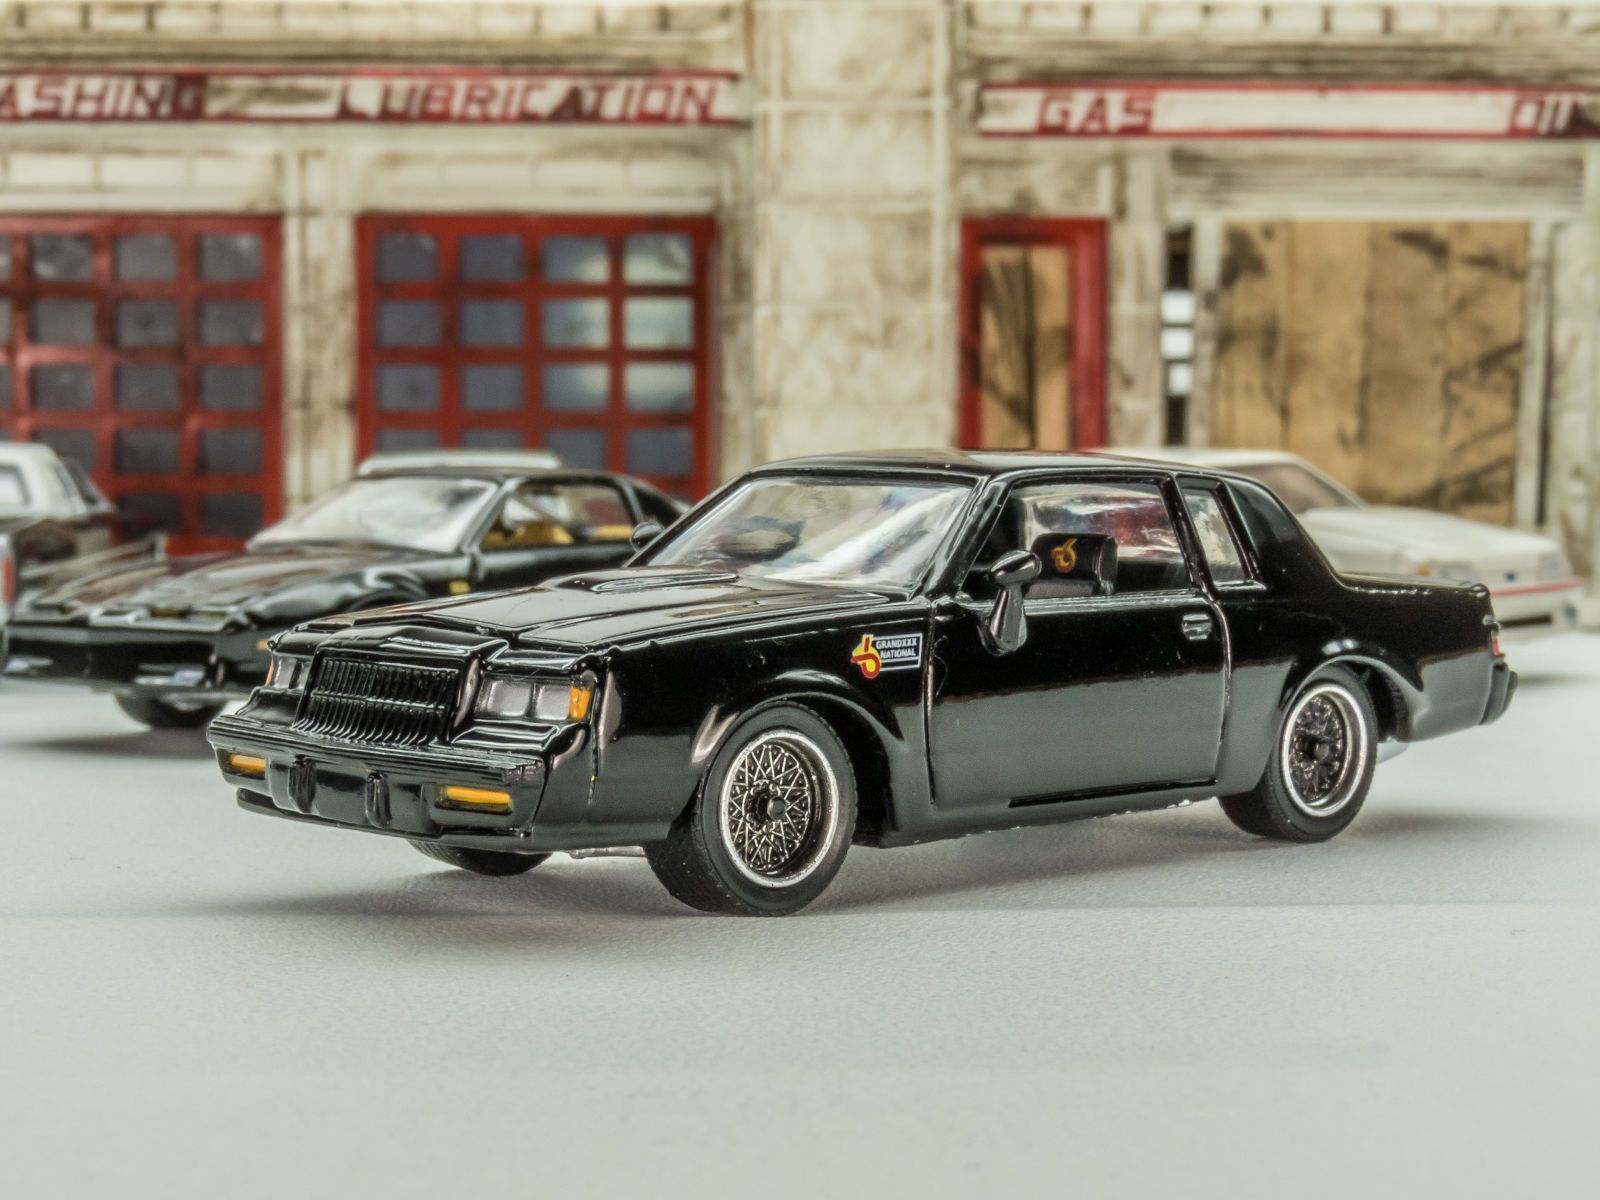 Illustration for article titled Ertl 1987 Buick Grand National 1:64 Scale Semi-Custom. Very picture heavy post....